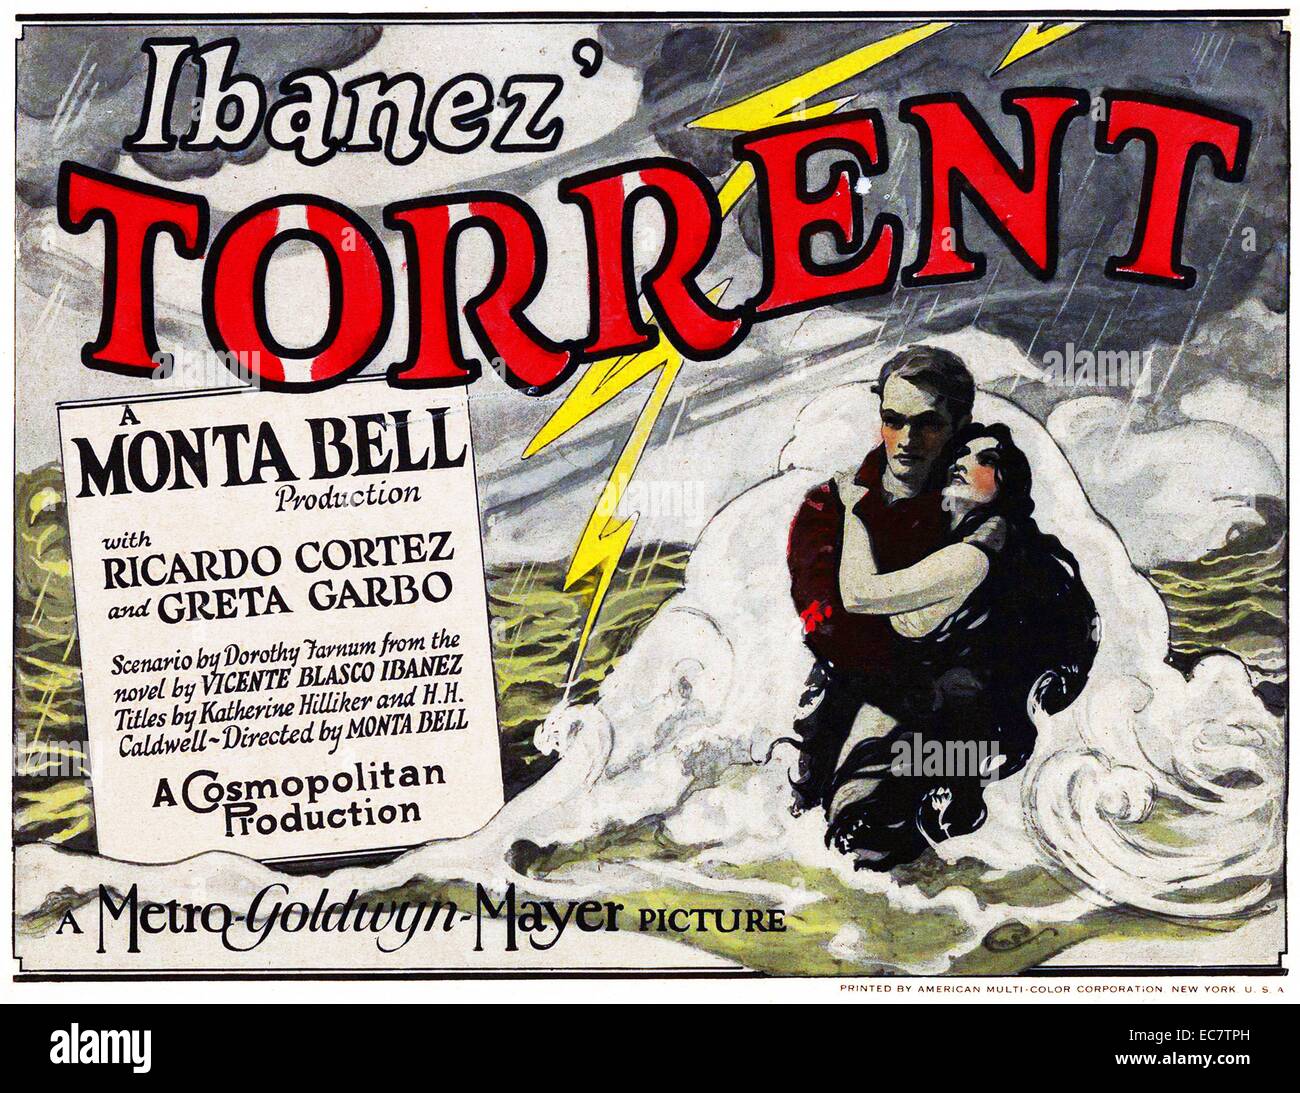 Torrent, 1926, is an American silent romantic drama film directed by Monta Bell and based on a novel by Vicente Blasco Ibáñez. Torrent was the first American film starring Swedish actress Greta Garbo. The film also starred Ricardo Cortez and Martha Mattox. Stock Photo